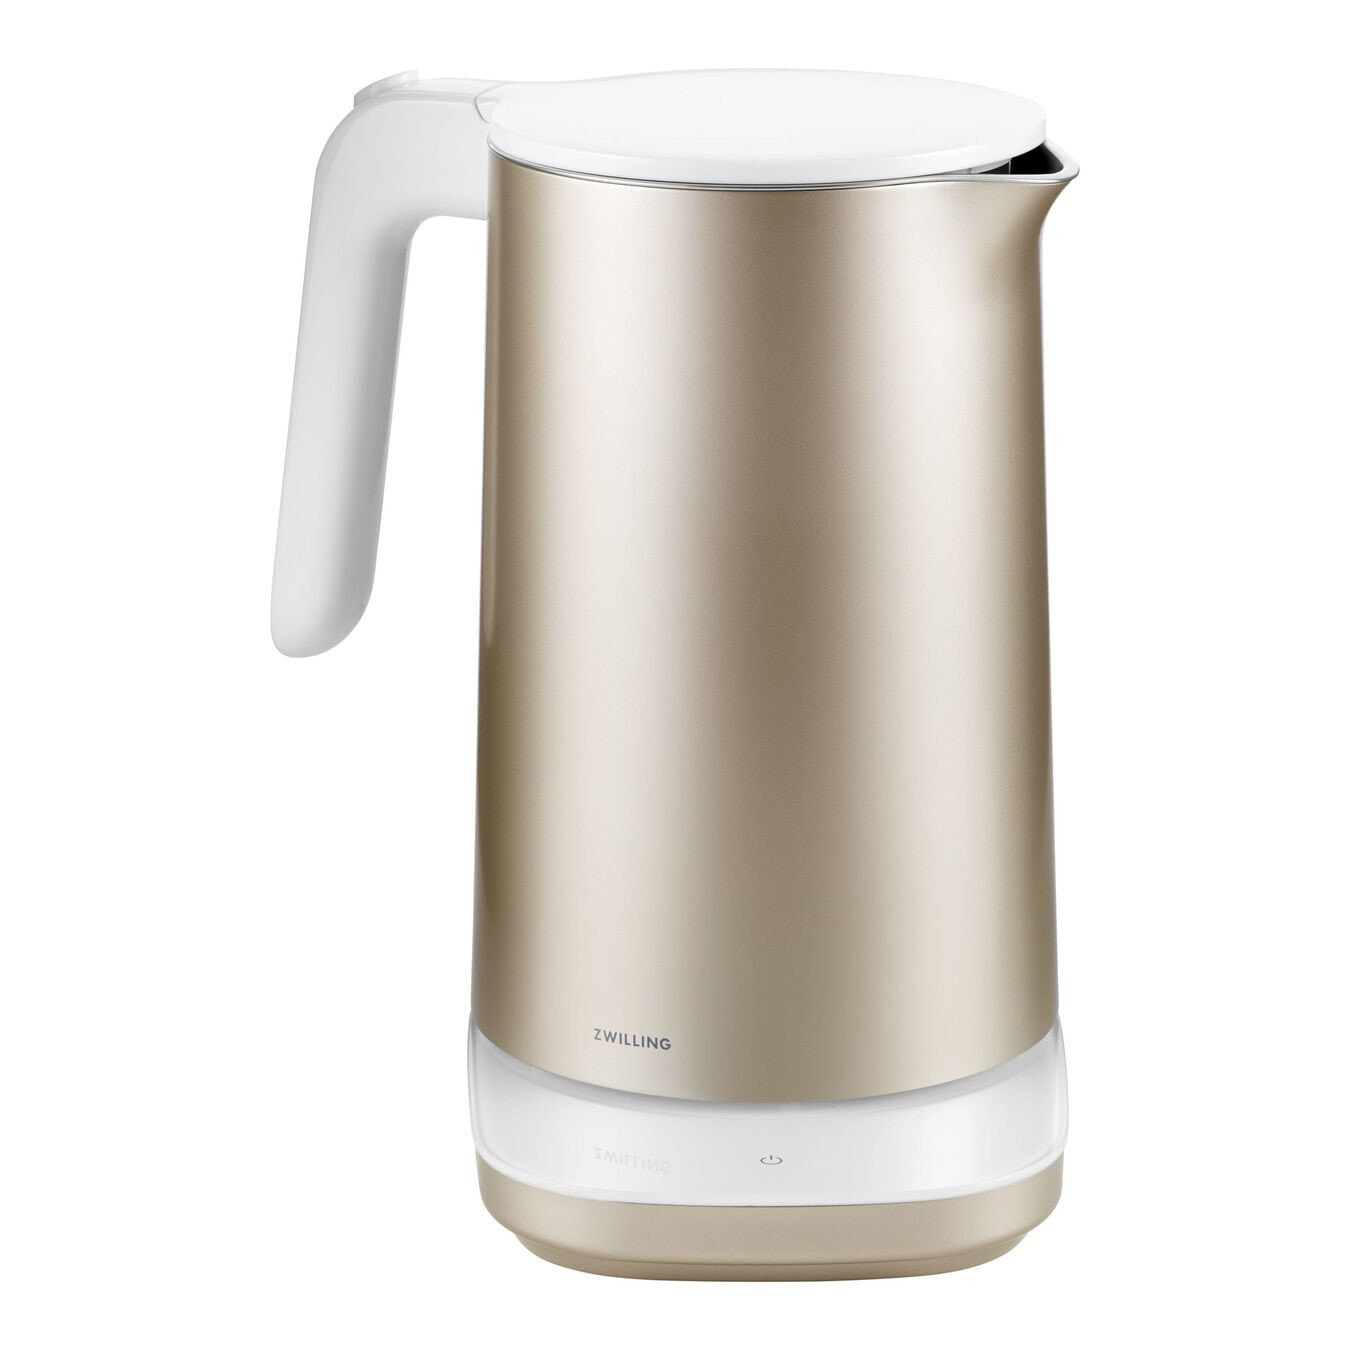 Zwilling ENFINIGY - 1.5 L - 1850 W - Gold - Stainless steel - Adjustable thermostat - Keep warm function